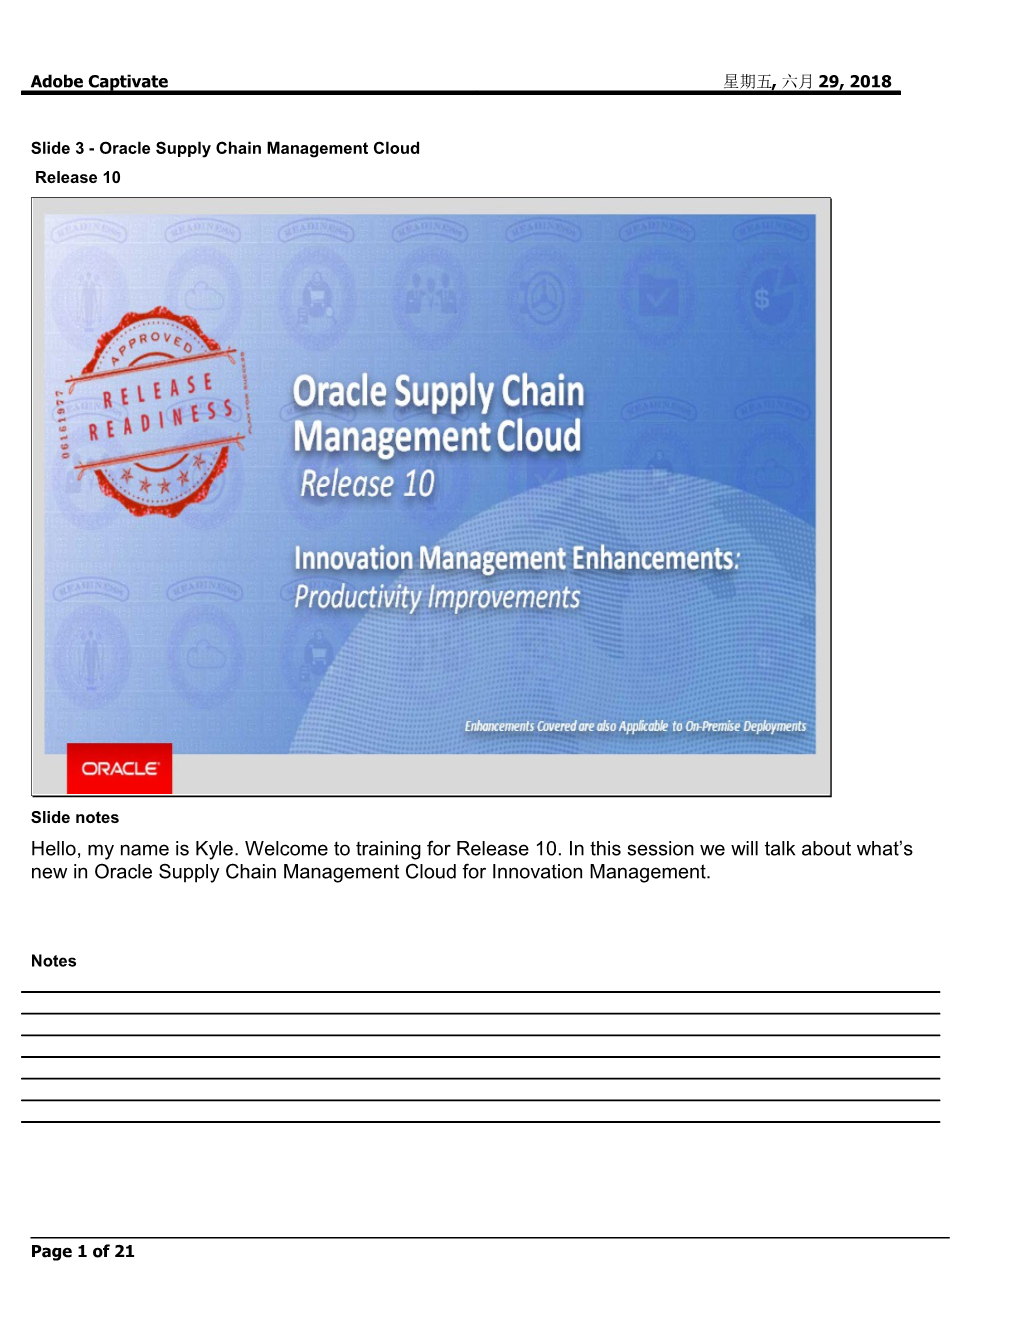 Slide 3 - Oracle Supply Chain Management Cloud